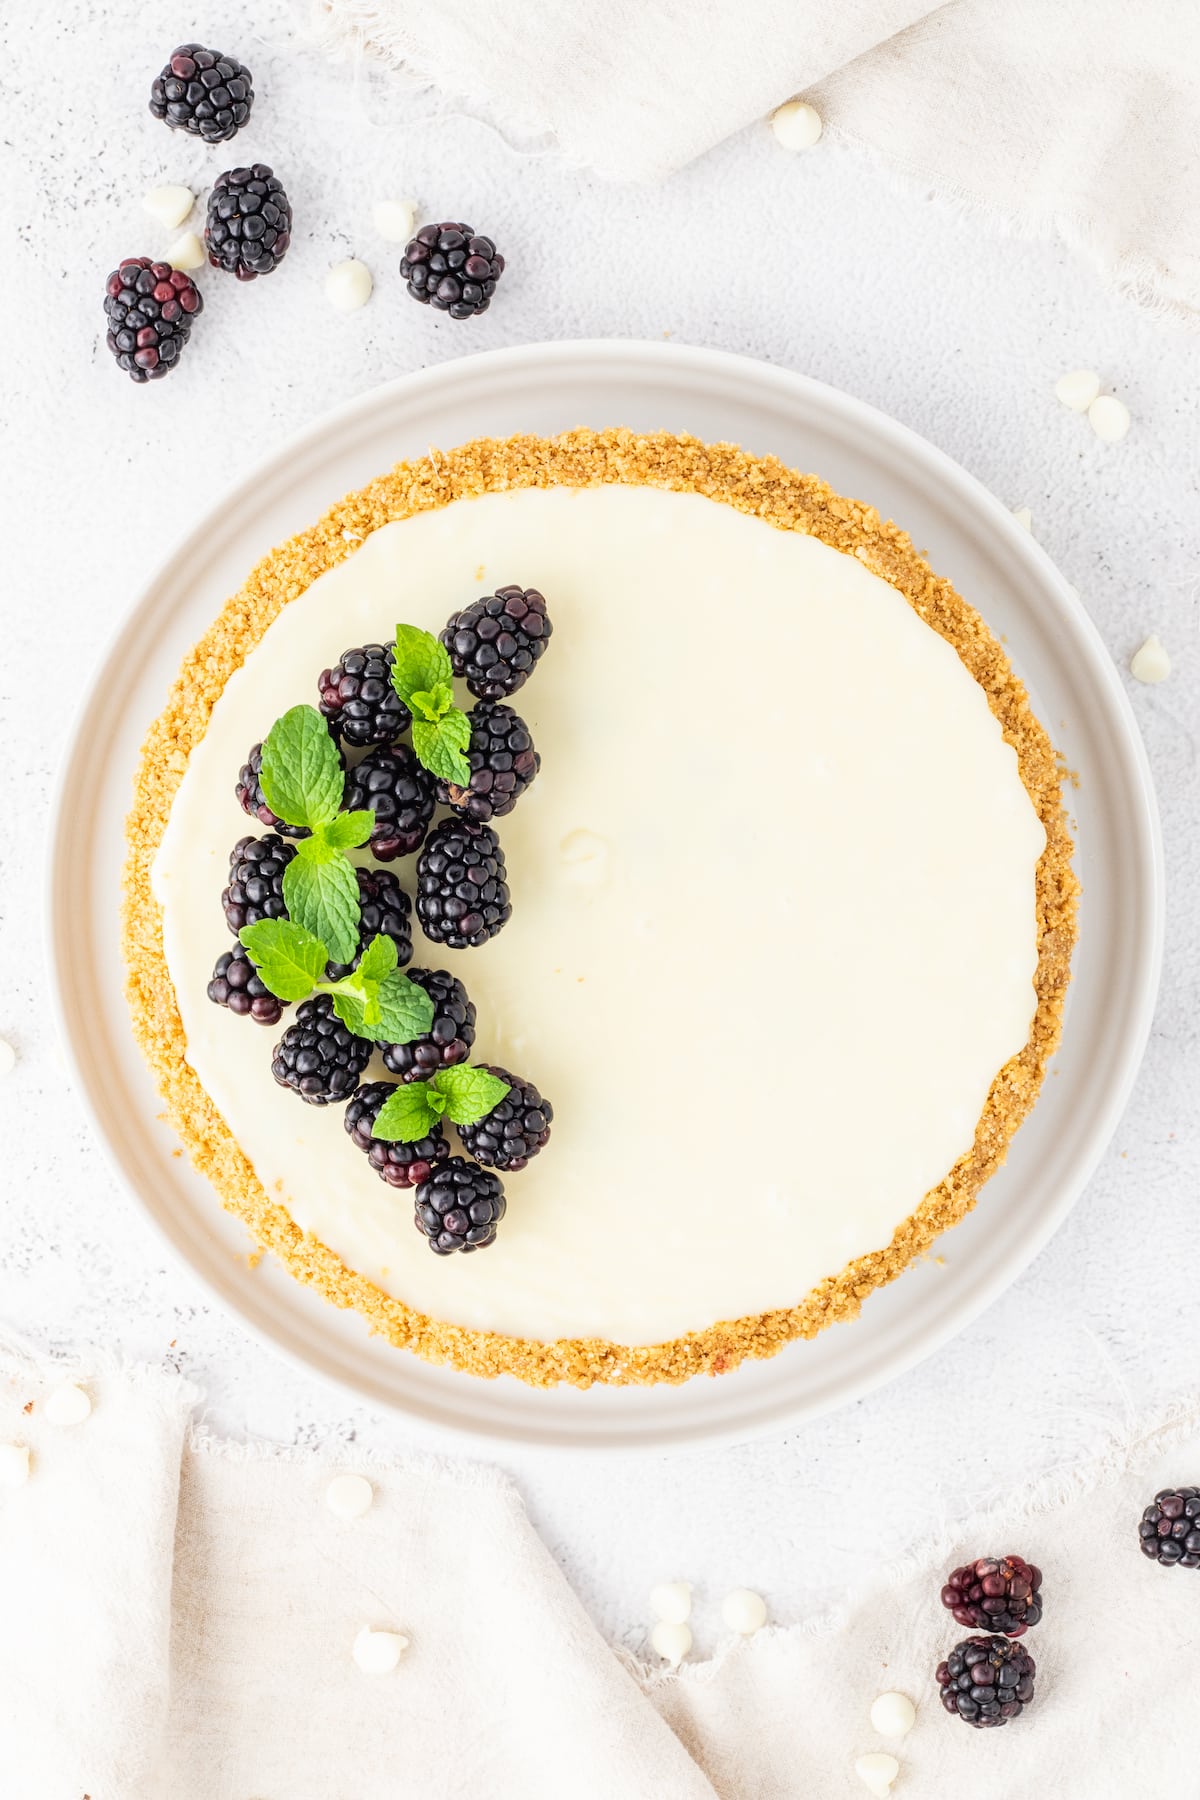 A heavenly white cheesecake adorned with plump blackberries and fresh mint leaves, elegantly presented on a pristine white plate.